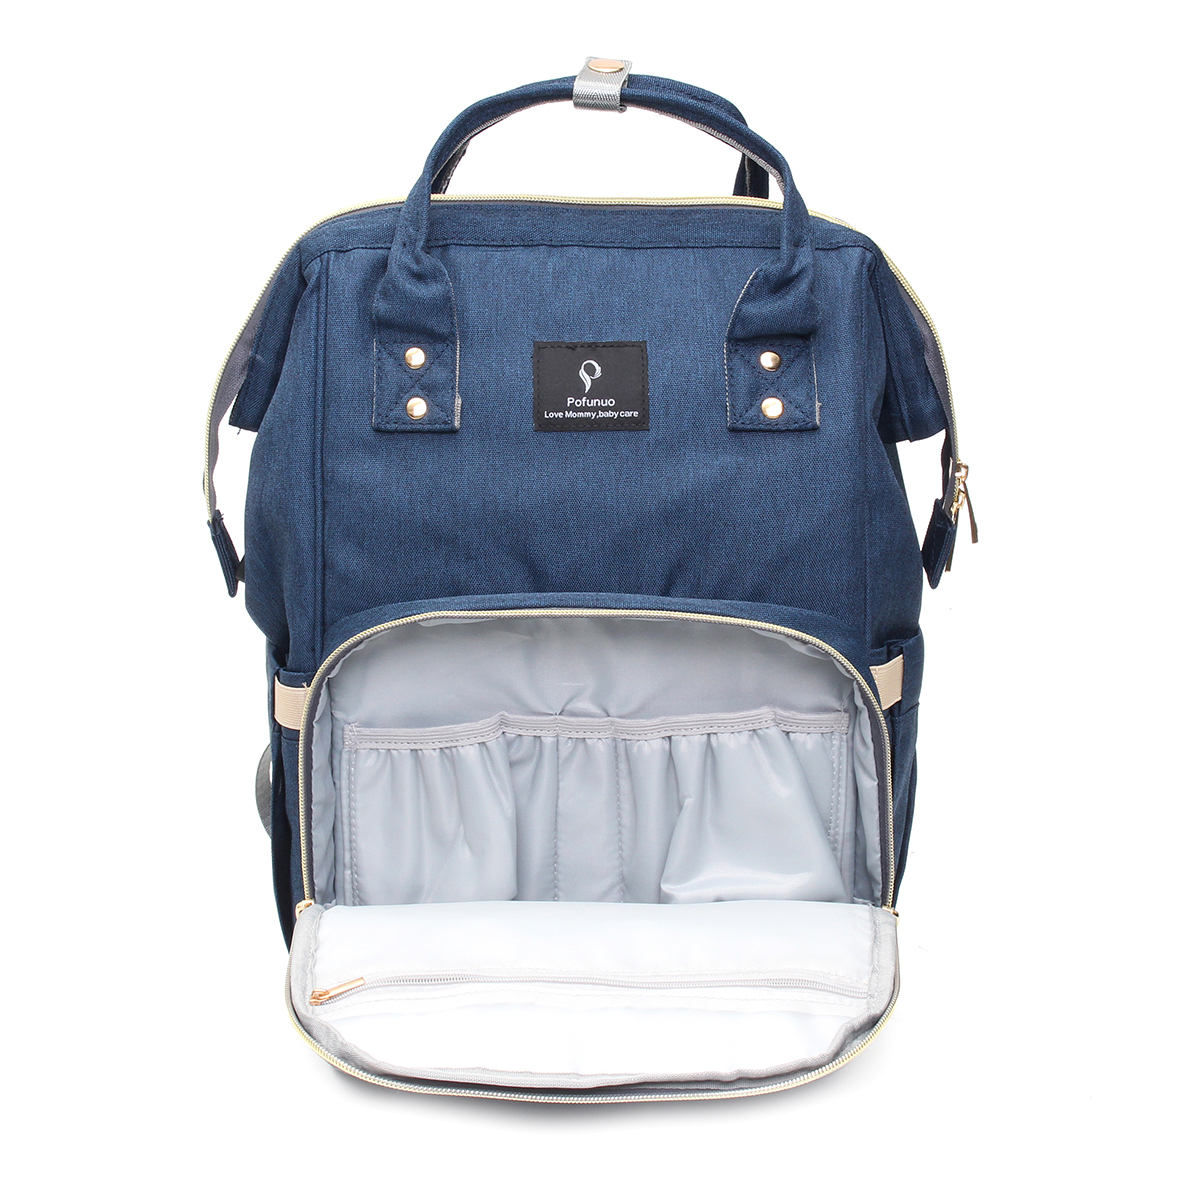 35L-Large-Mummy-Nappy-Baby-Diaper-Bags-Travel-Changing-Nursing-Nappies-Backpack-1298439